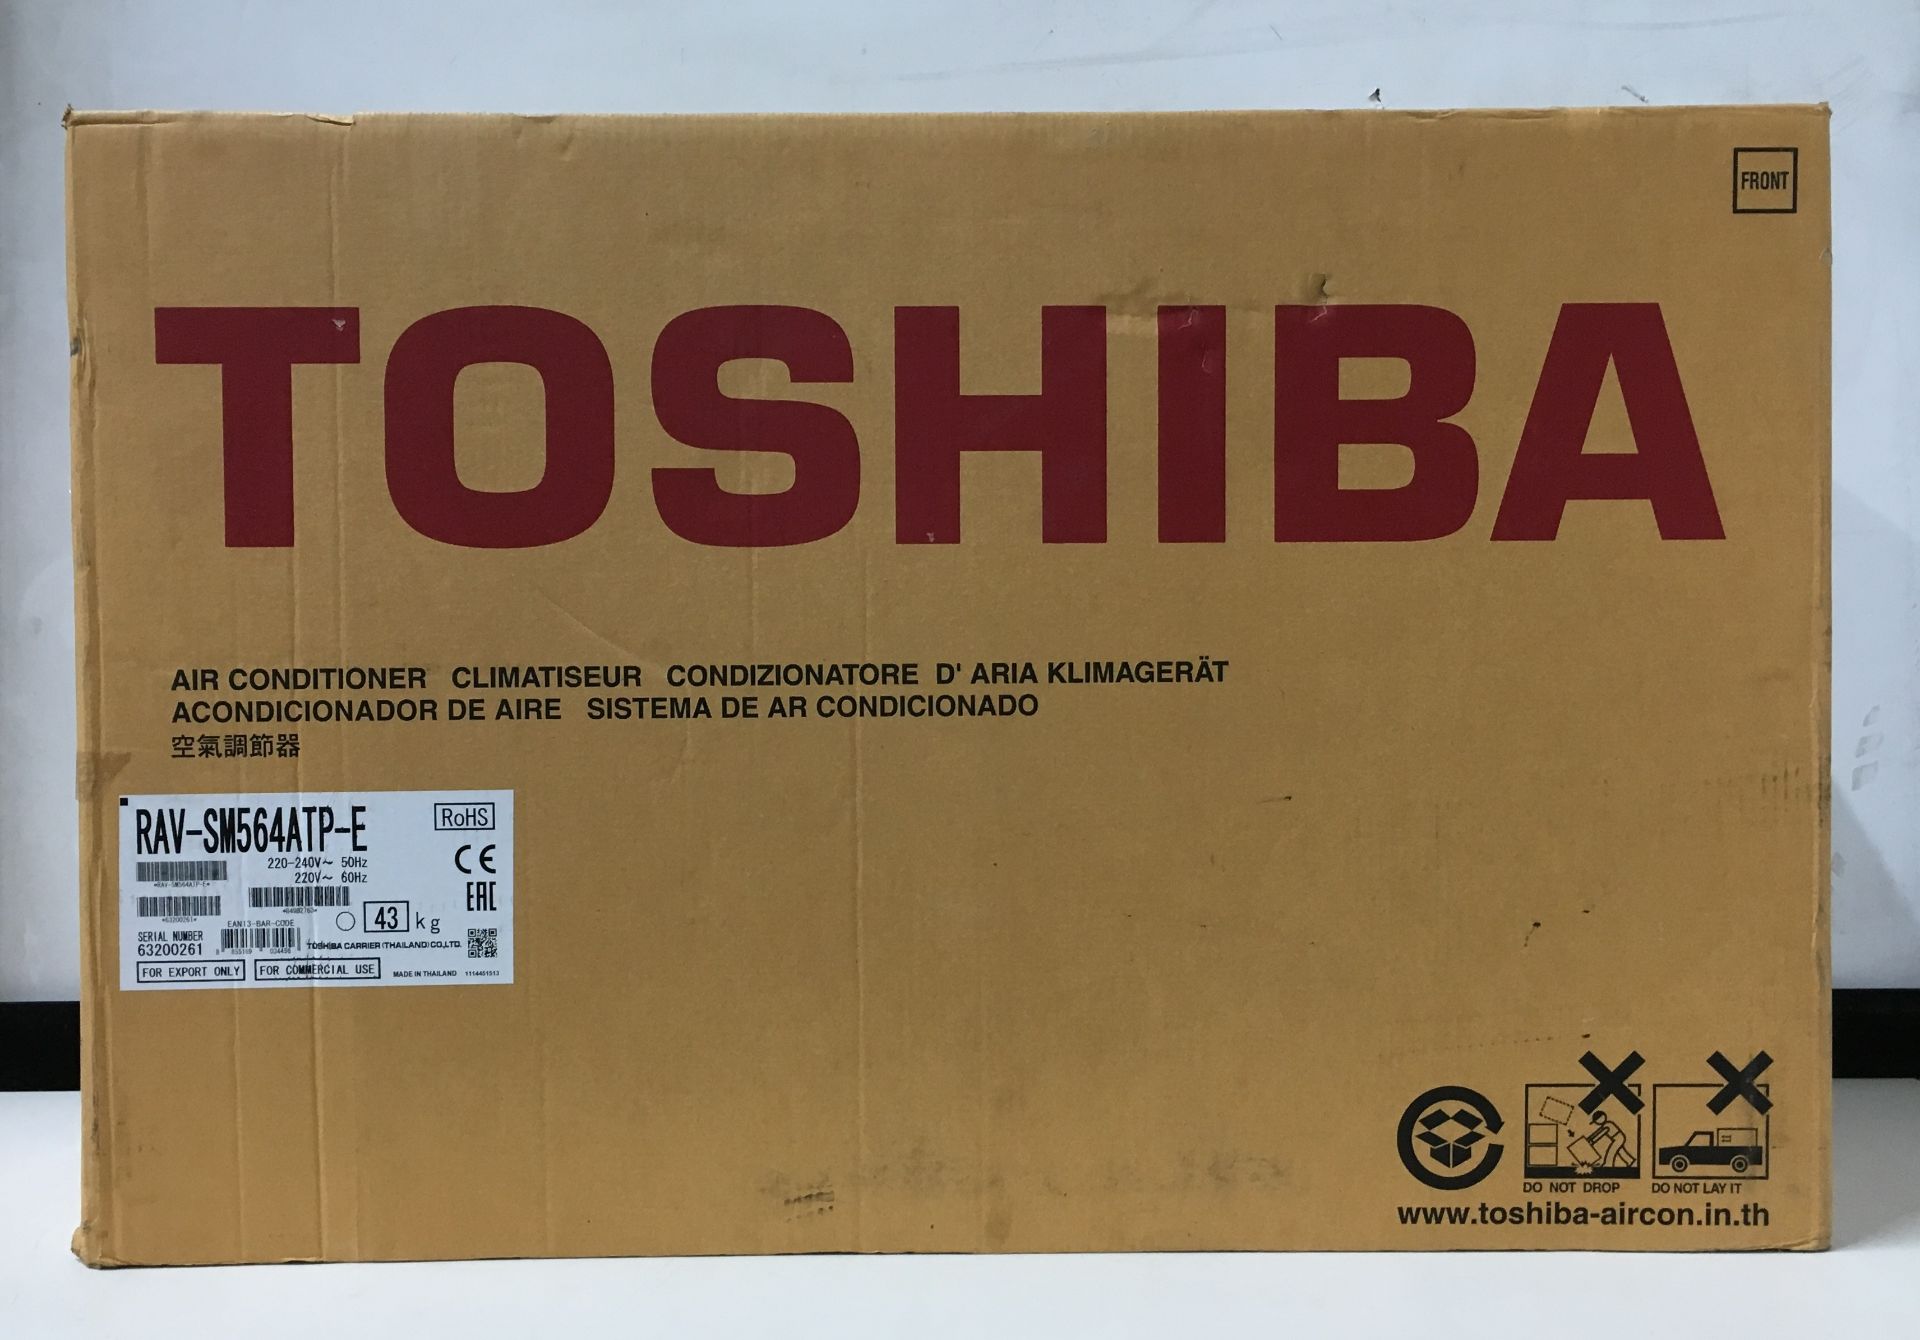 Toshiba Digital Outdoor Air Conditioning Unit - Image 6 of 7